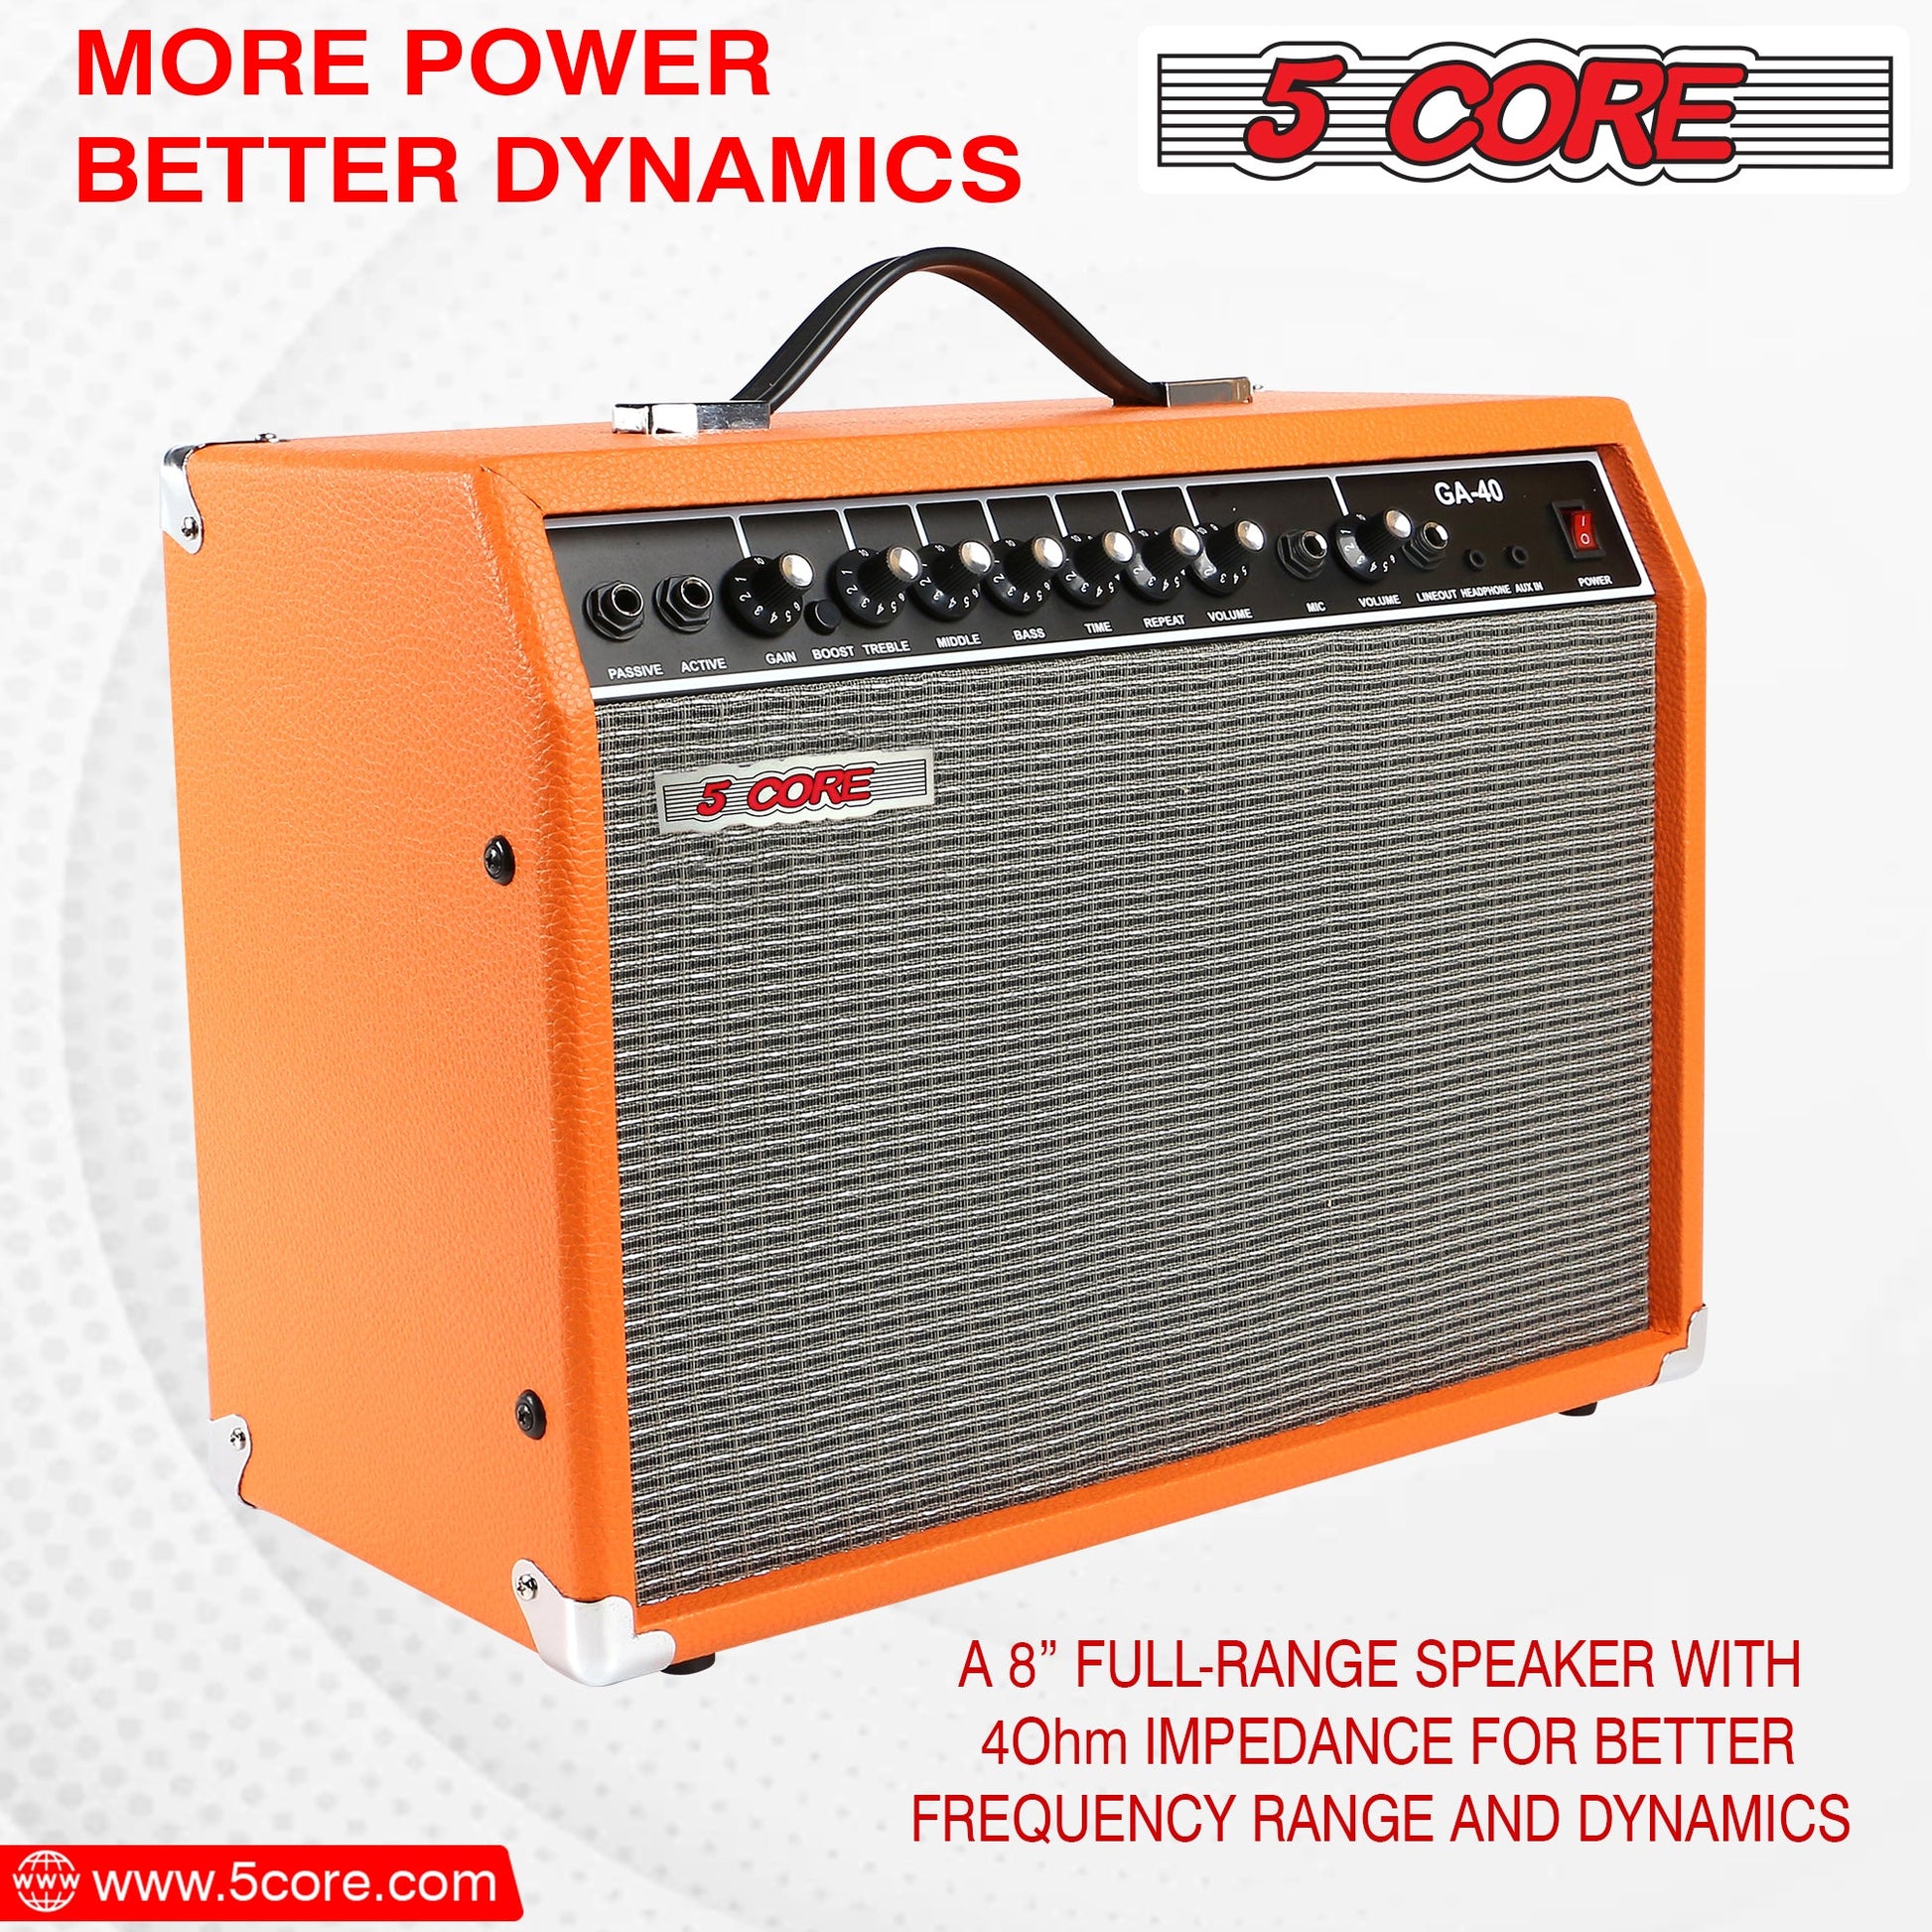 5 Core 40W Guitar Amplifier Orange - Clean and Distortion Channel - Electric Amp with Equalization and AUX Line Input - for Recording Studio, Practice Room, Small Courtyard- GA 40 ORG-5